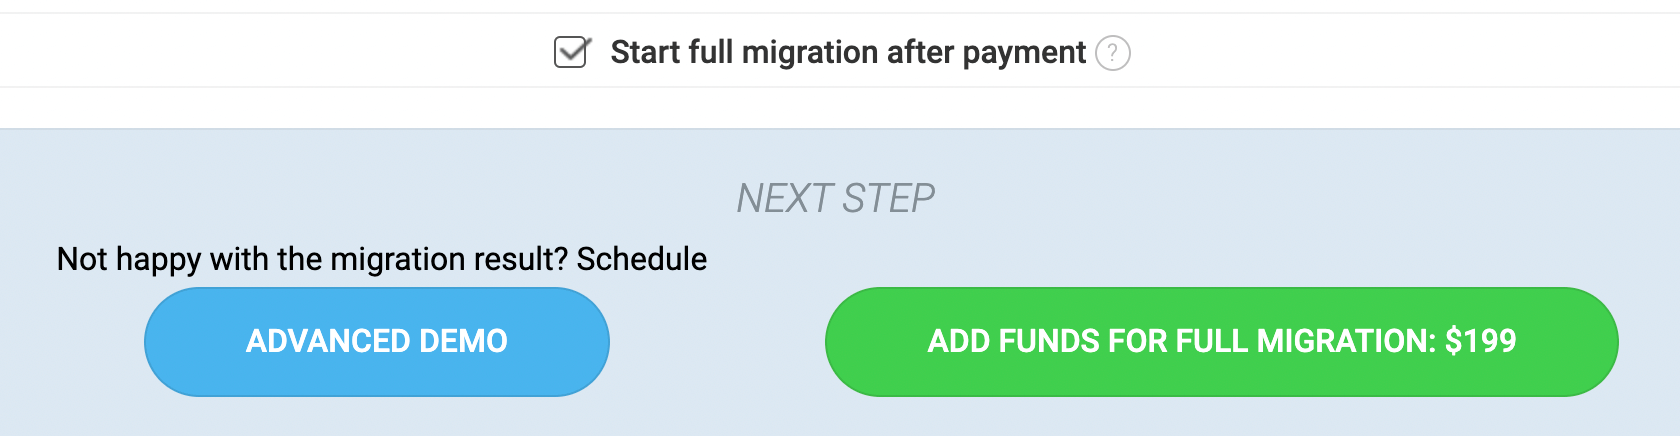 pay and complete the full migration